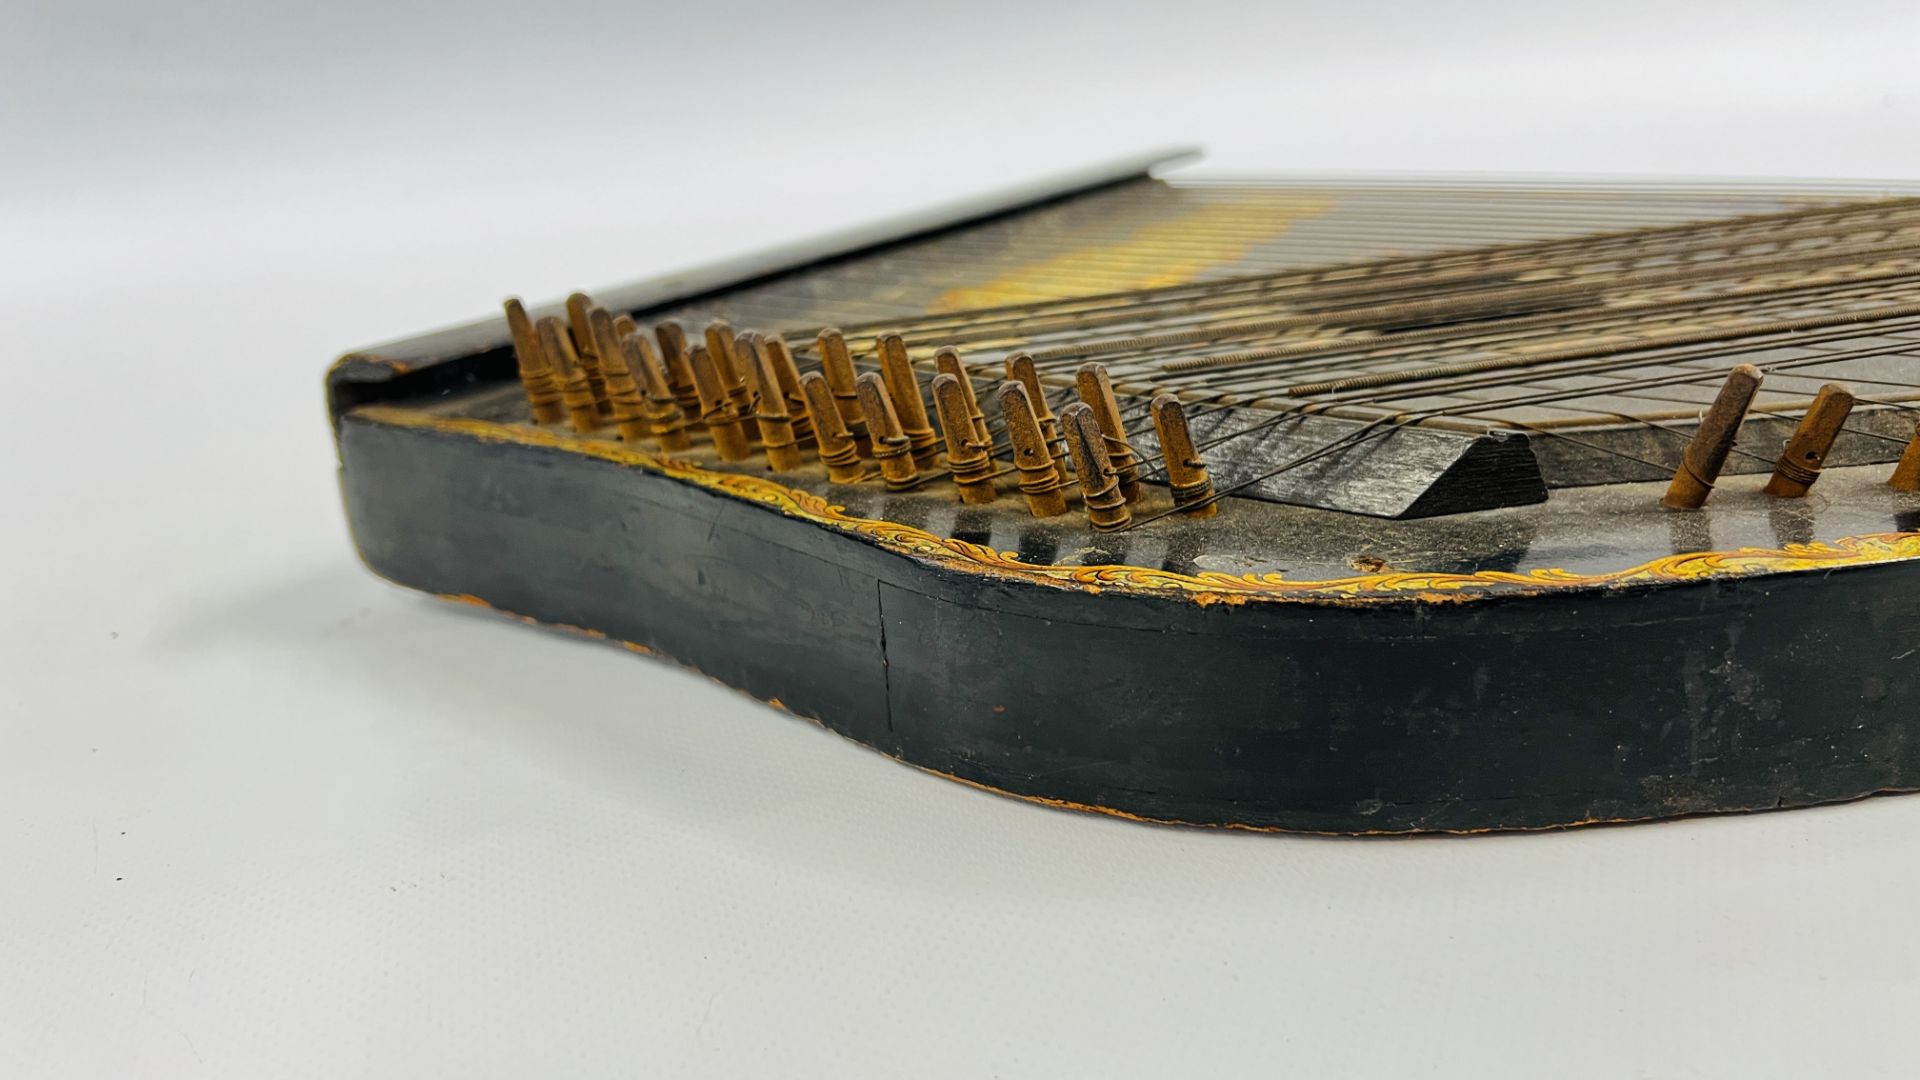 A VINTAGE "THE ANGLO AMERICAN LION ZITHER" MANUFACTURED BY THE ANGLO AMERICAN ZITHER Co NEW YORK - Image 12 of 13